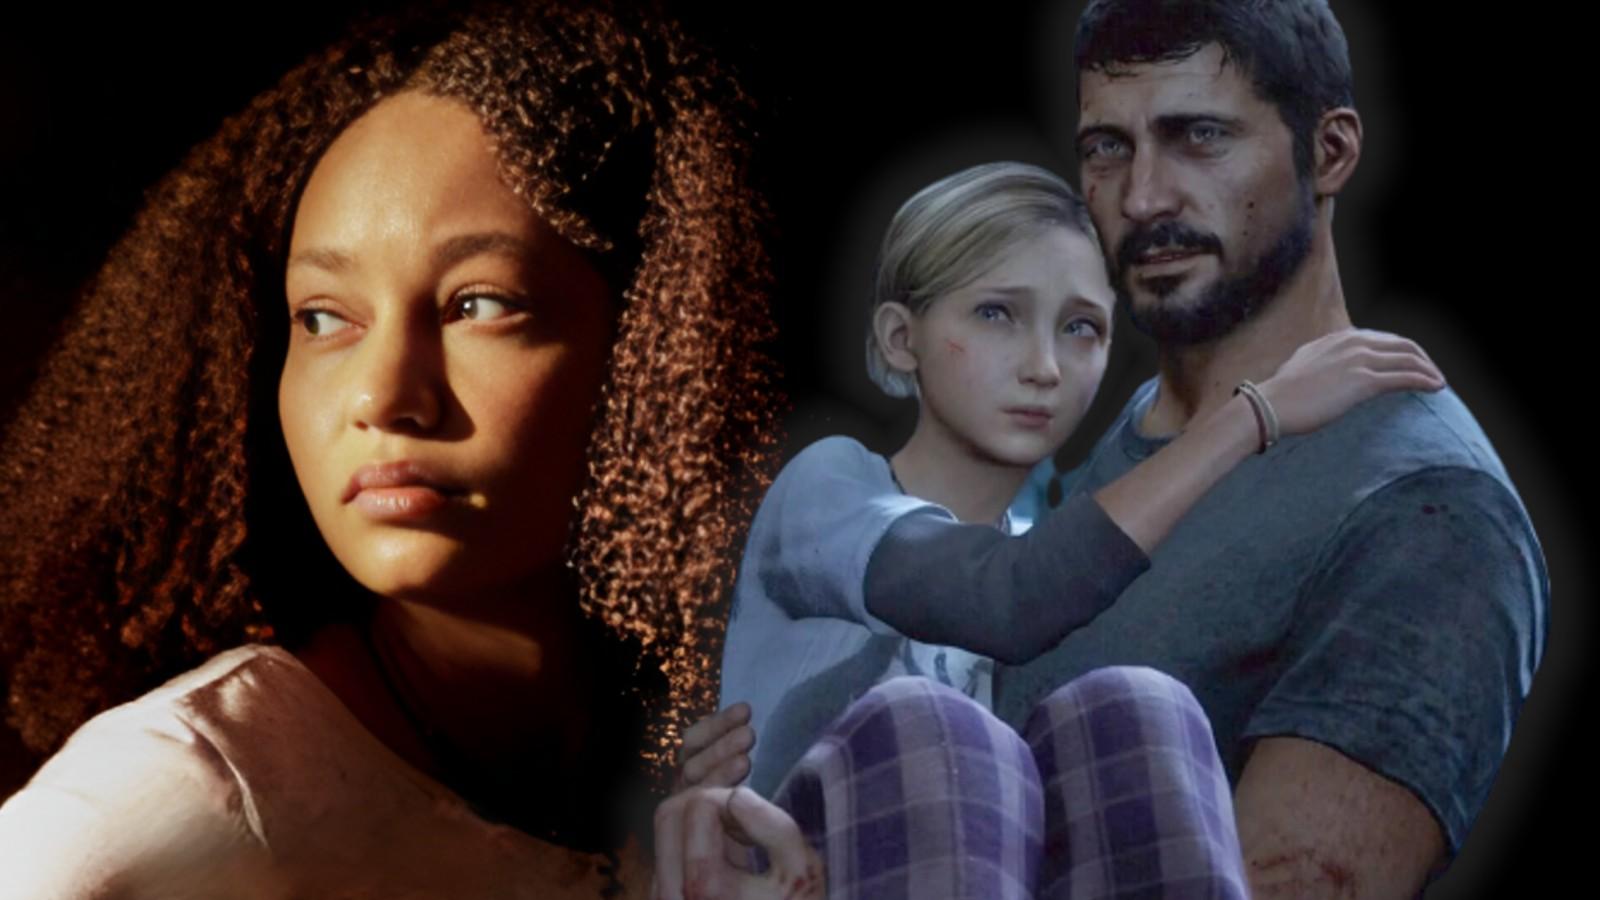 Why You Recognize Sarah's Actress From HBO's The Last Of Us